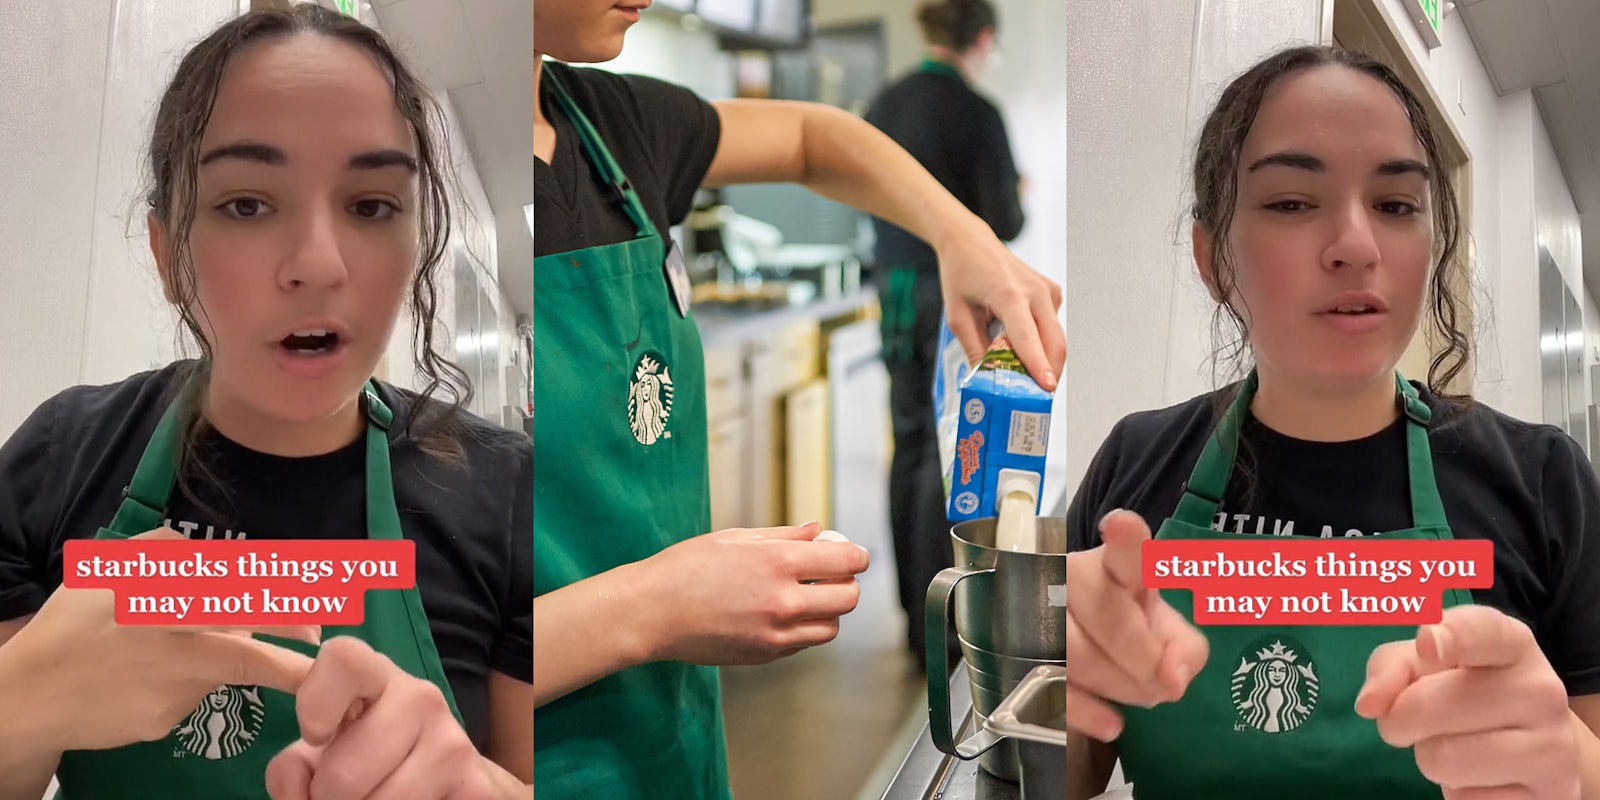 Starbucks barista speaking holding finger caption 'starbucks things you may not know' (l) Starbucks barista pouring liquid into metal container (c) Starbucks barista speaking pointing fingers caption 'starbucks things you may not know' (r)